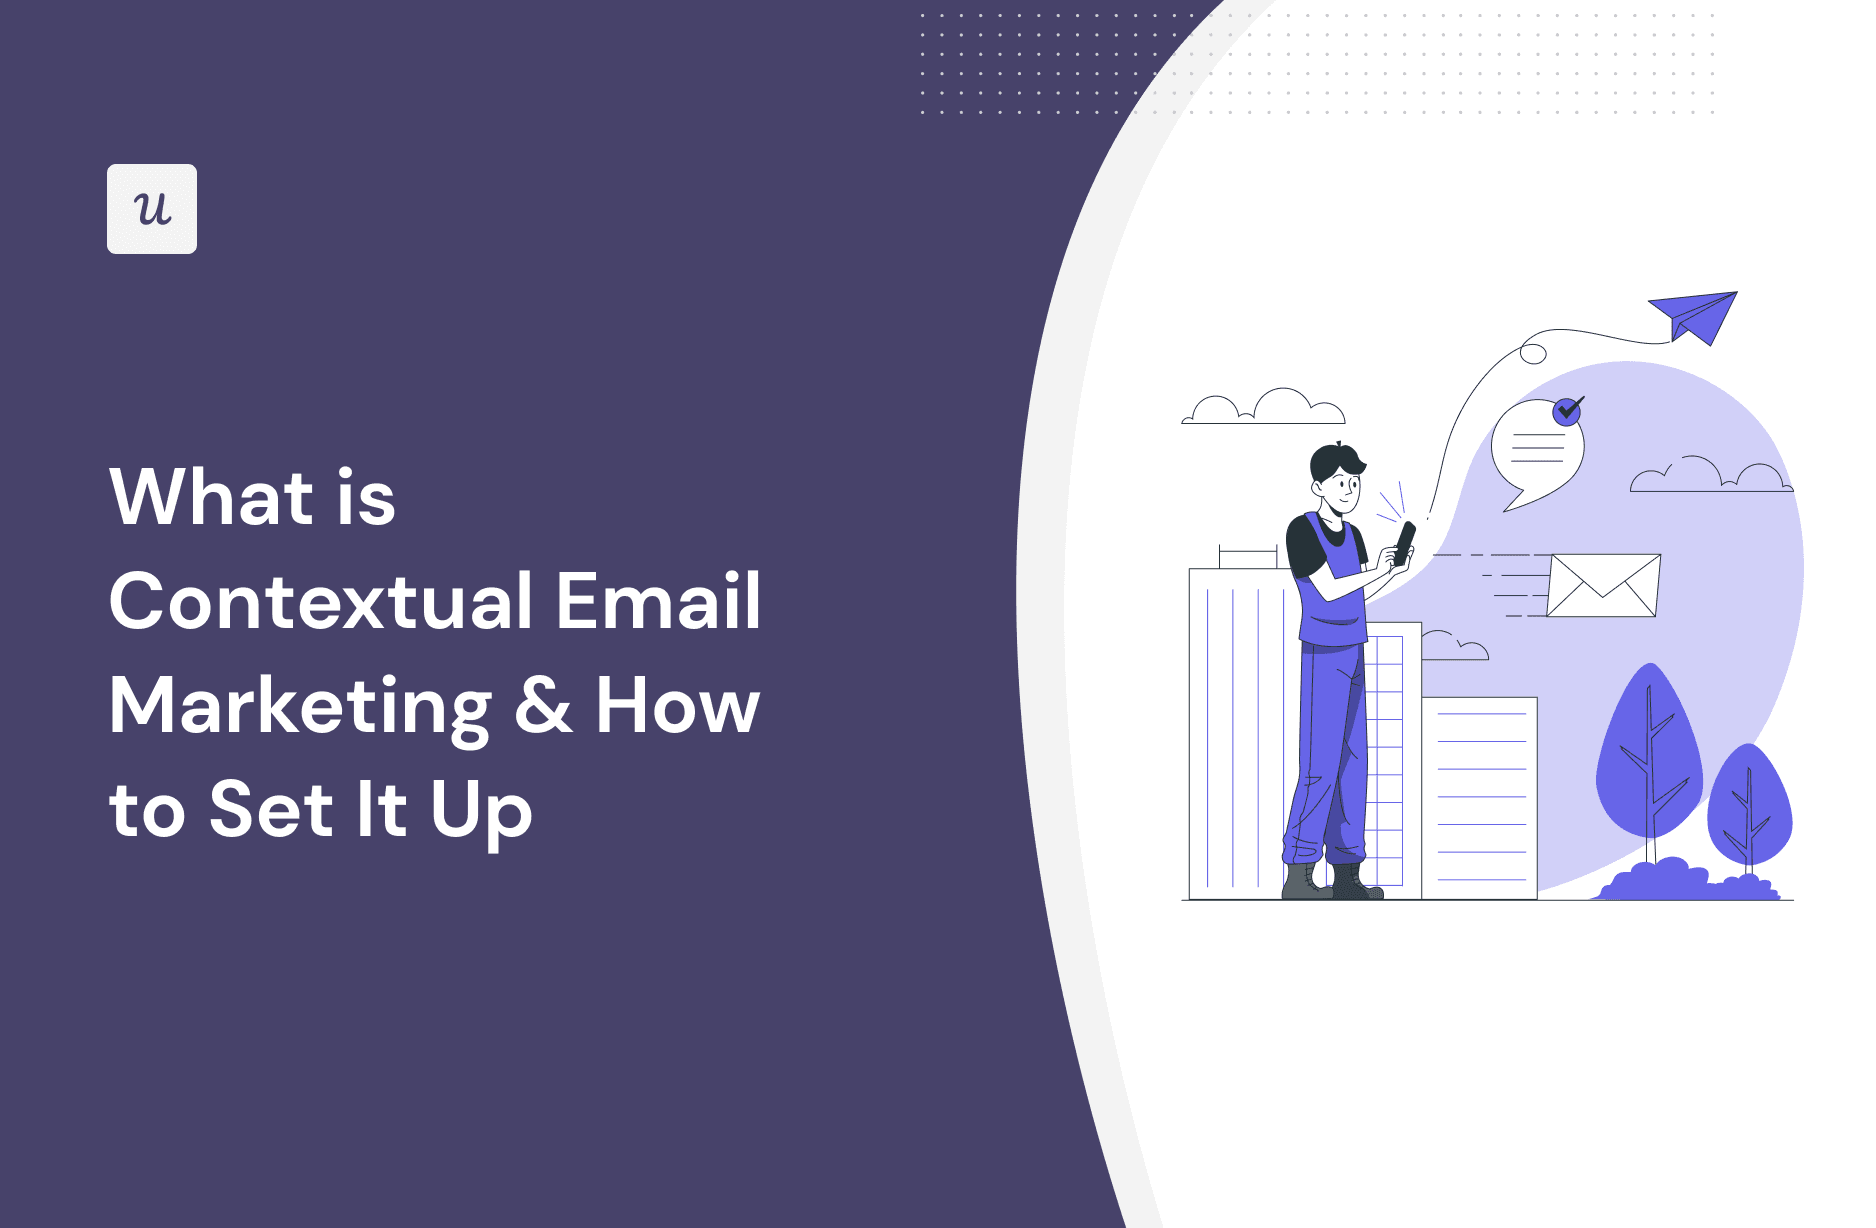 What is Contextual Email Marketing & How to Set It Up cover